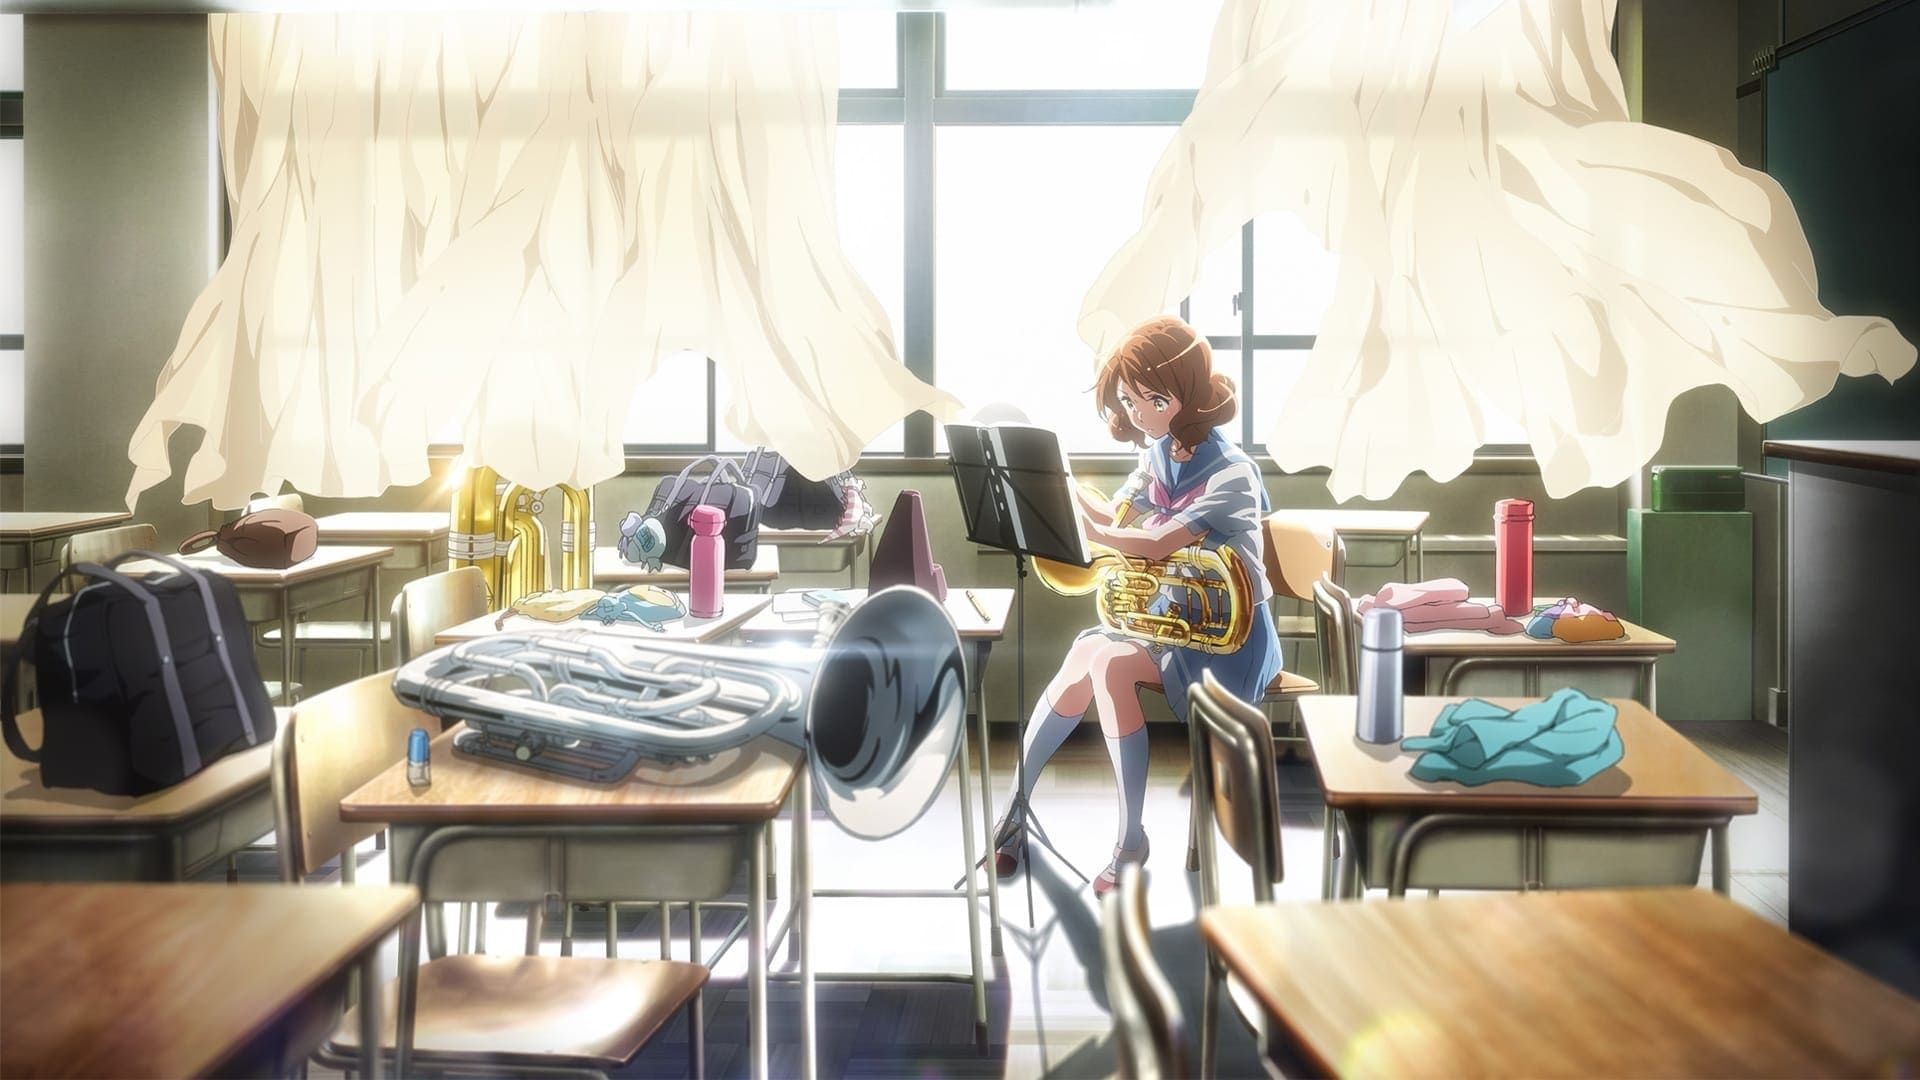 Sound! Euphonium: The Movie - Welcome to the Kitauji High School Concert Band Backdrop